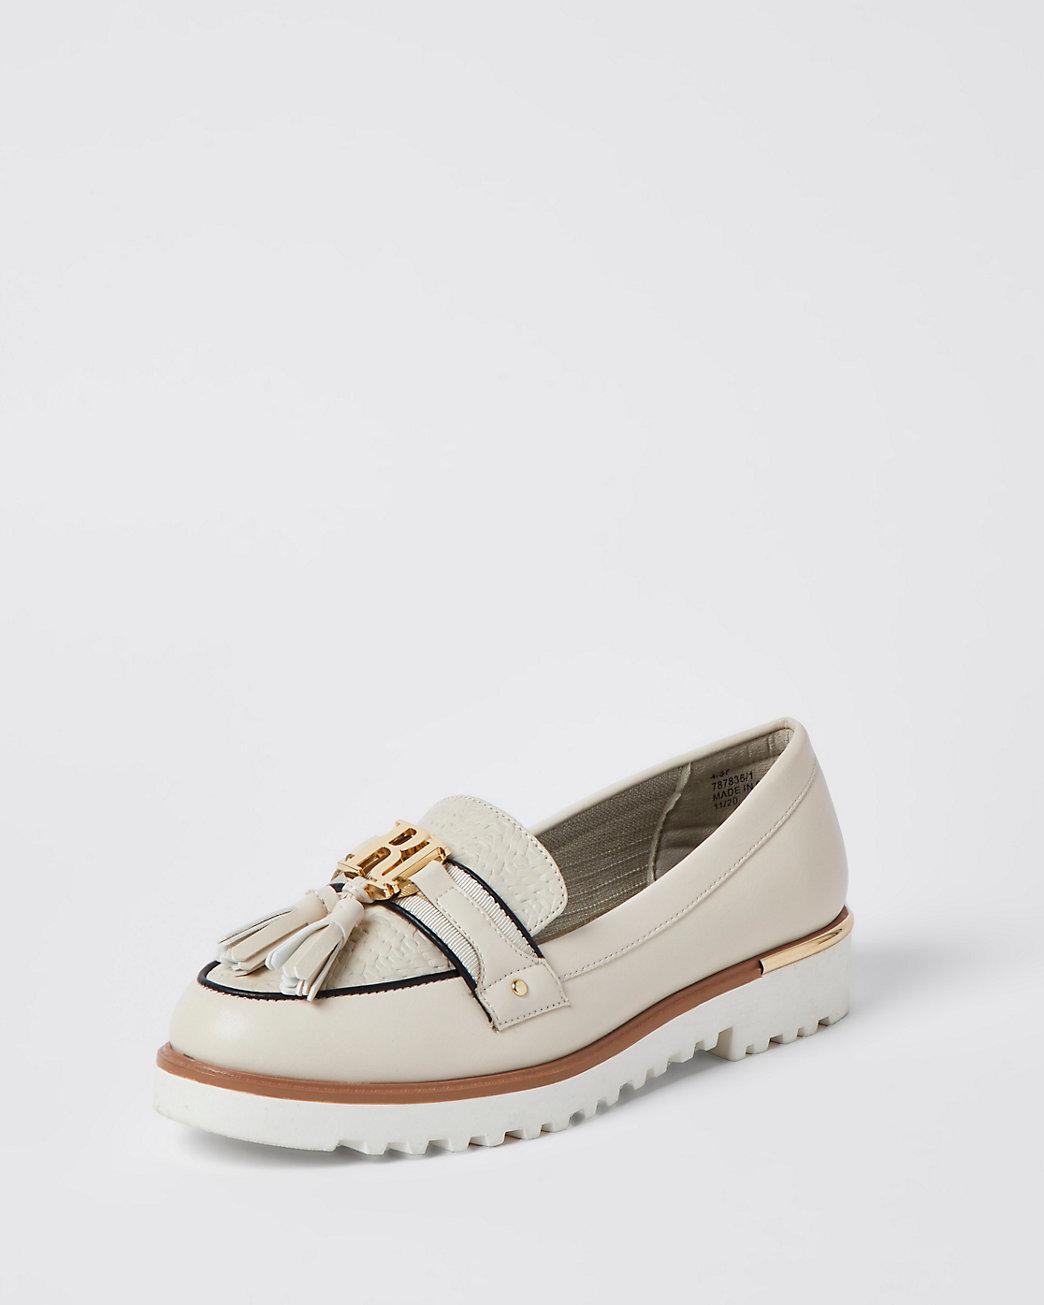 River Island Cream Ri Branded Tassel Loafers in Natural | Lyst